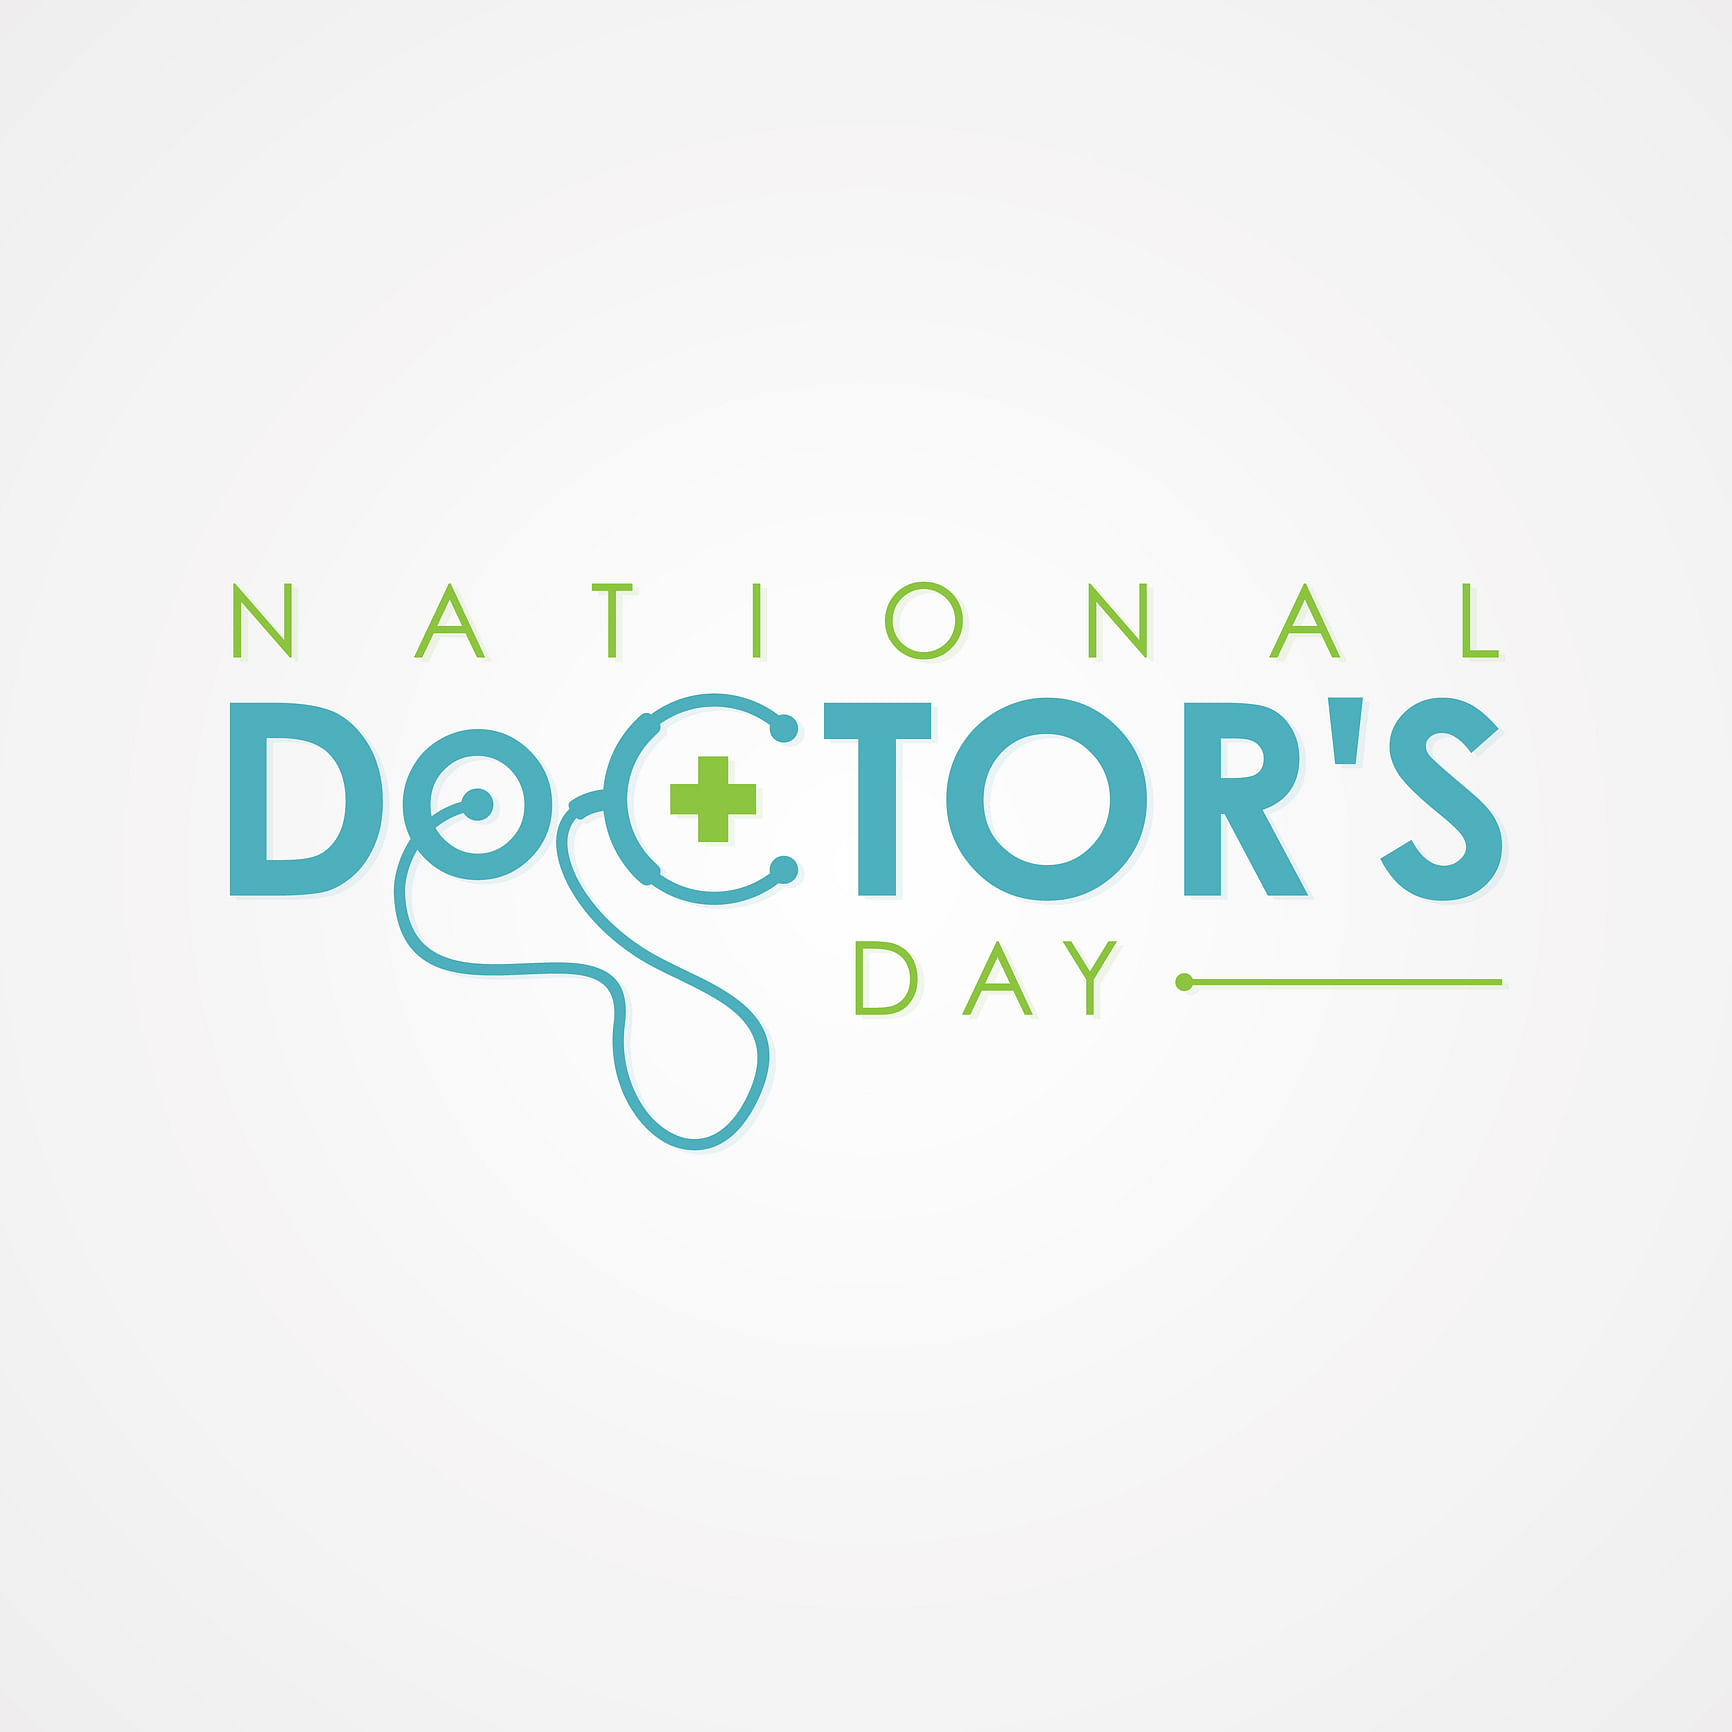 National Doctor's Day on July 1